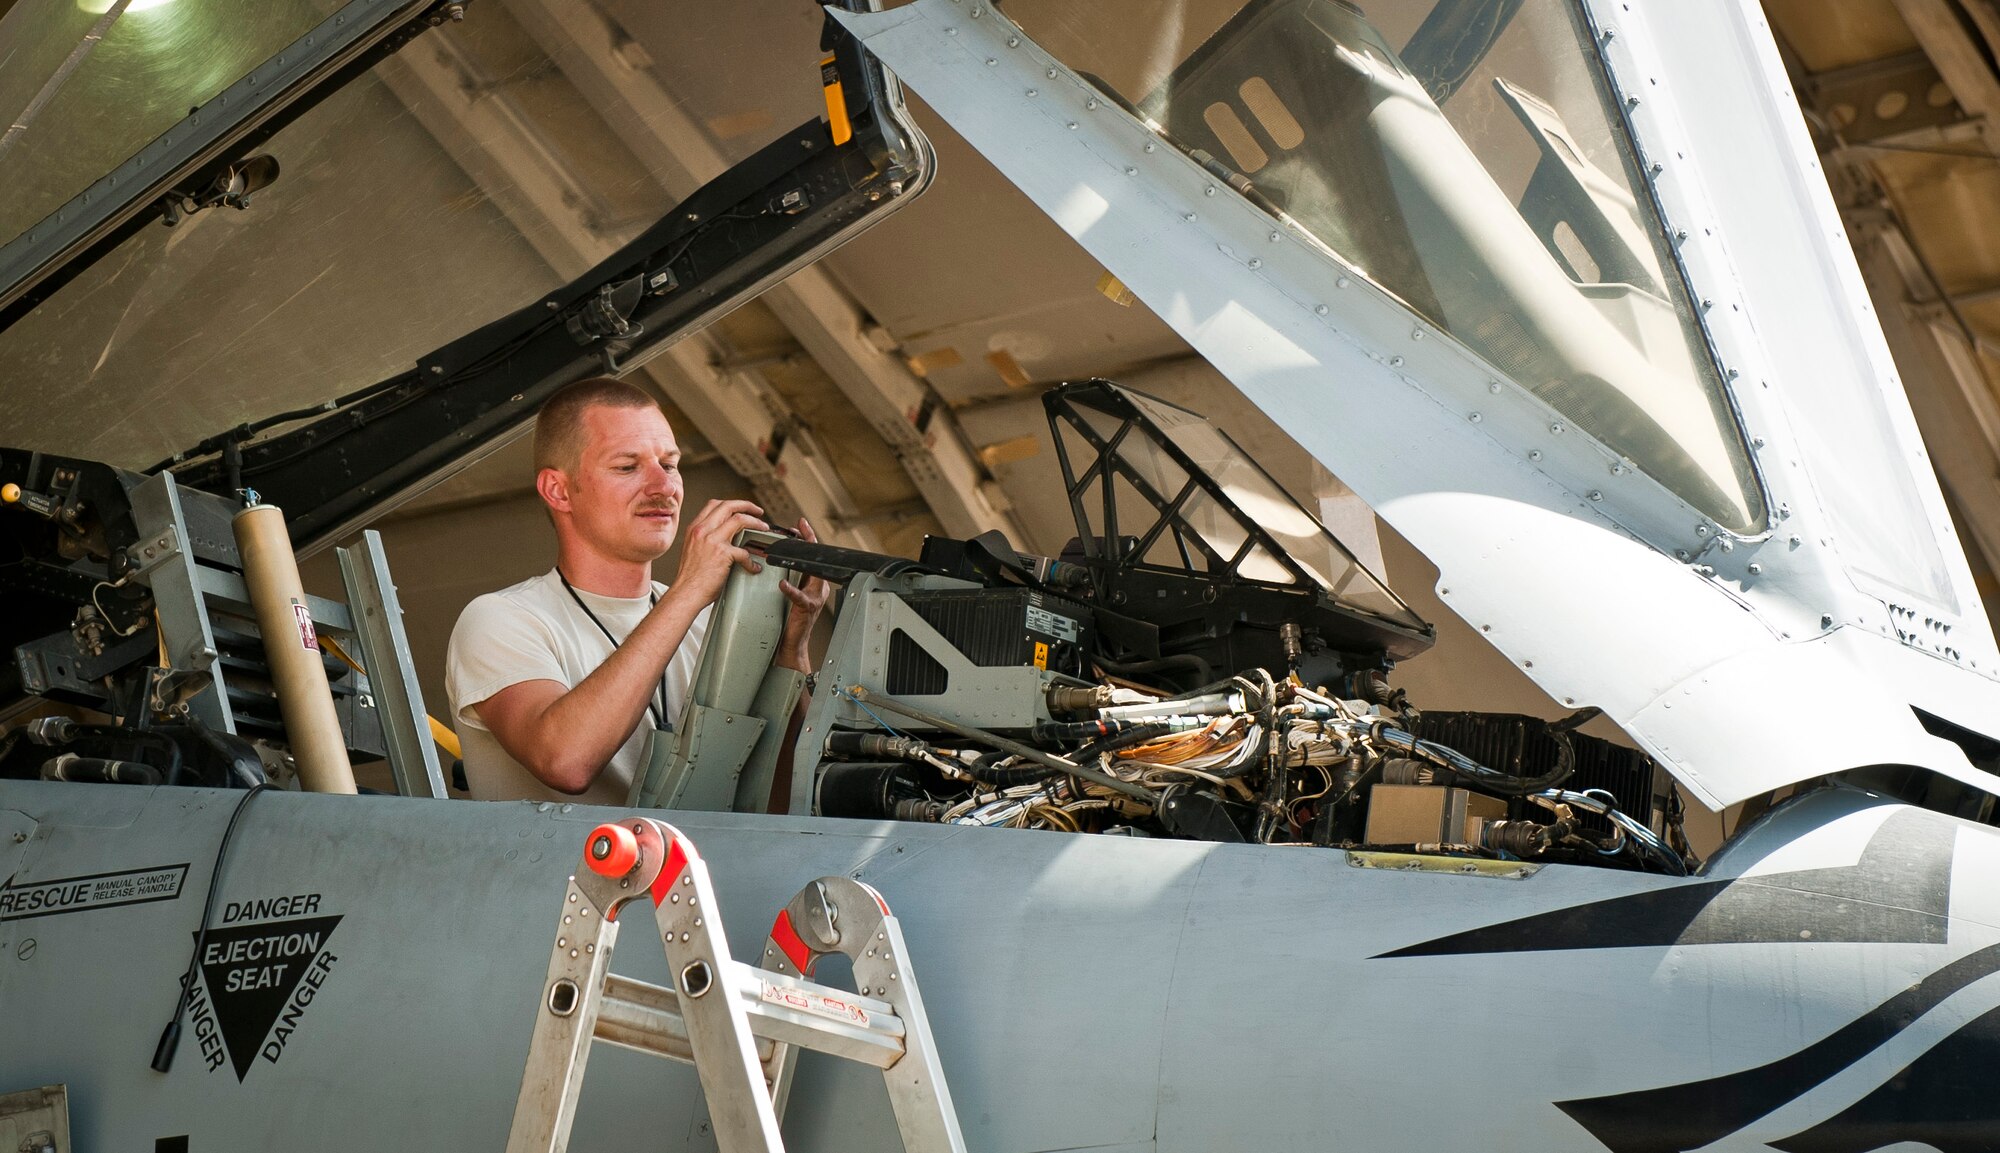 Tech Sgt. Robert Haag, an aircraft phase maintenance specialist with 188th Fighter Wing deployed with the 455th Expeditionary Maintenance Squadron, works in the cockpit of a 188th A-10C Thunderbolt II during phase maintenance at Bagram Airfield, Afghanistan, August 9, 2012. The Airmen adhere to a strict schedule of maintenance to keep Bagram’s aircraft safe and operational. (U.S. Air Force photo by Capt. Raymond Geoffroy)